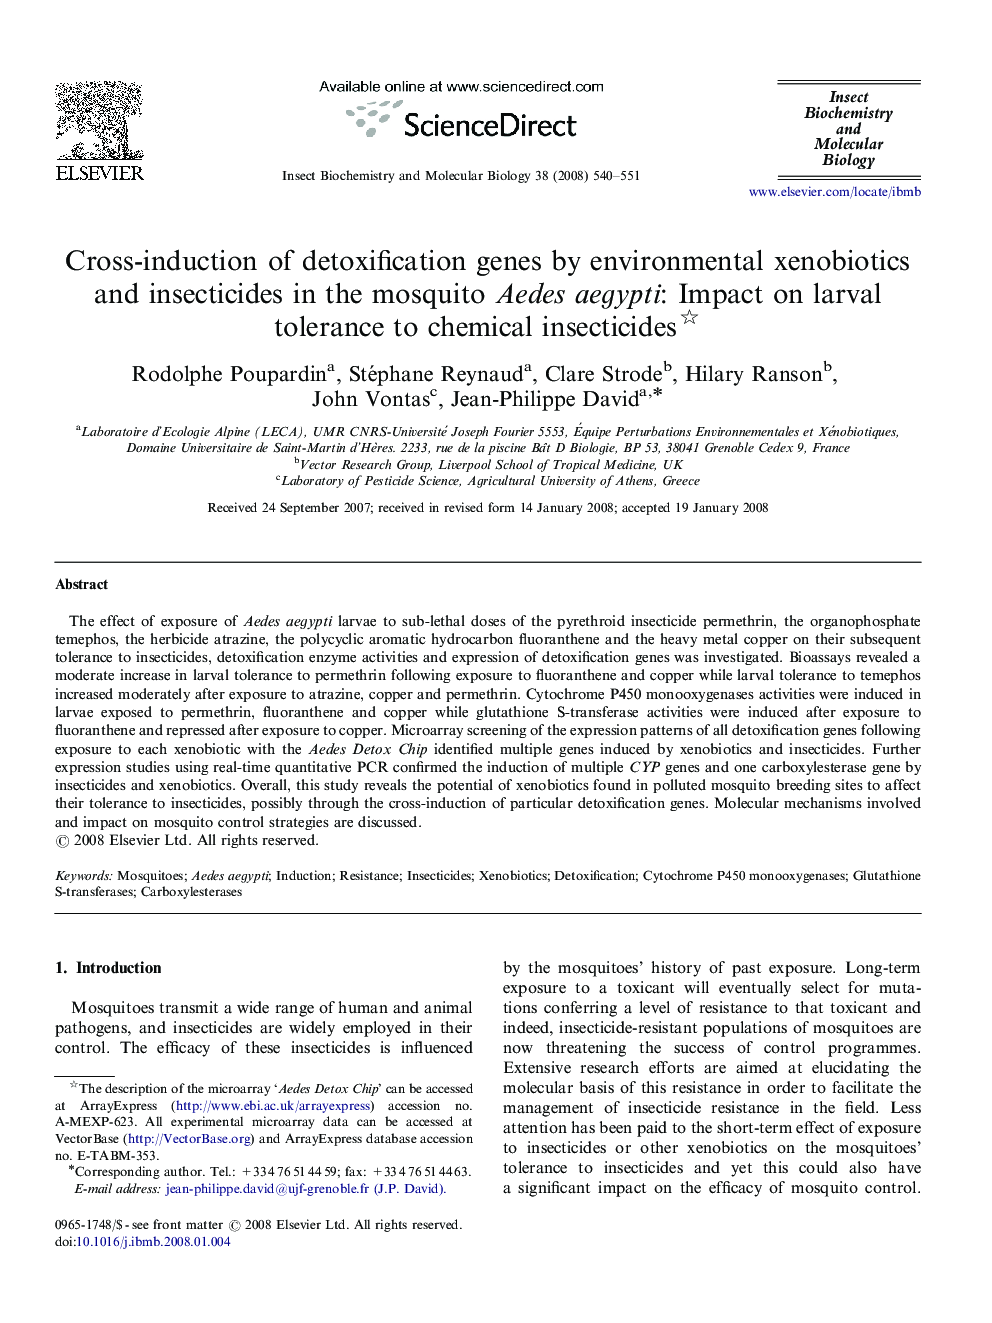 Cross-induction of detoxification genes by environmental xenobiotics and insecticides in the mosquito Aedes aegypti: Impact on larval tolerance to chemical insecticides 